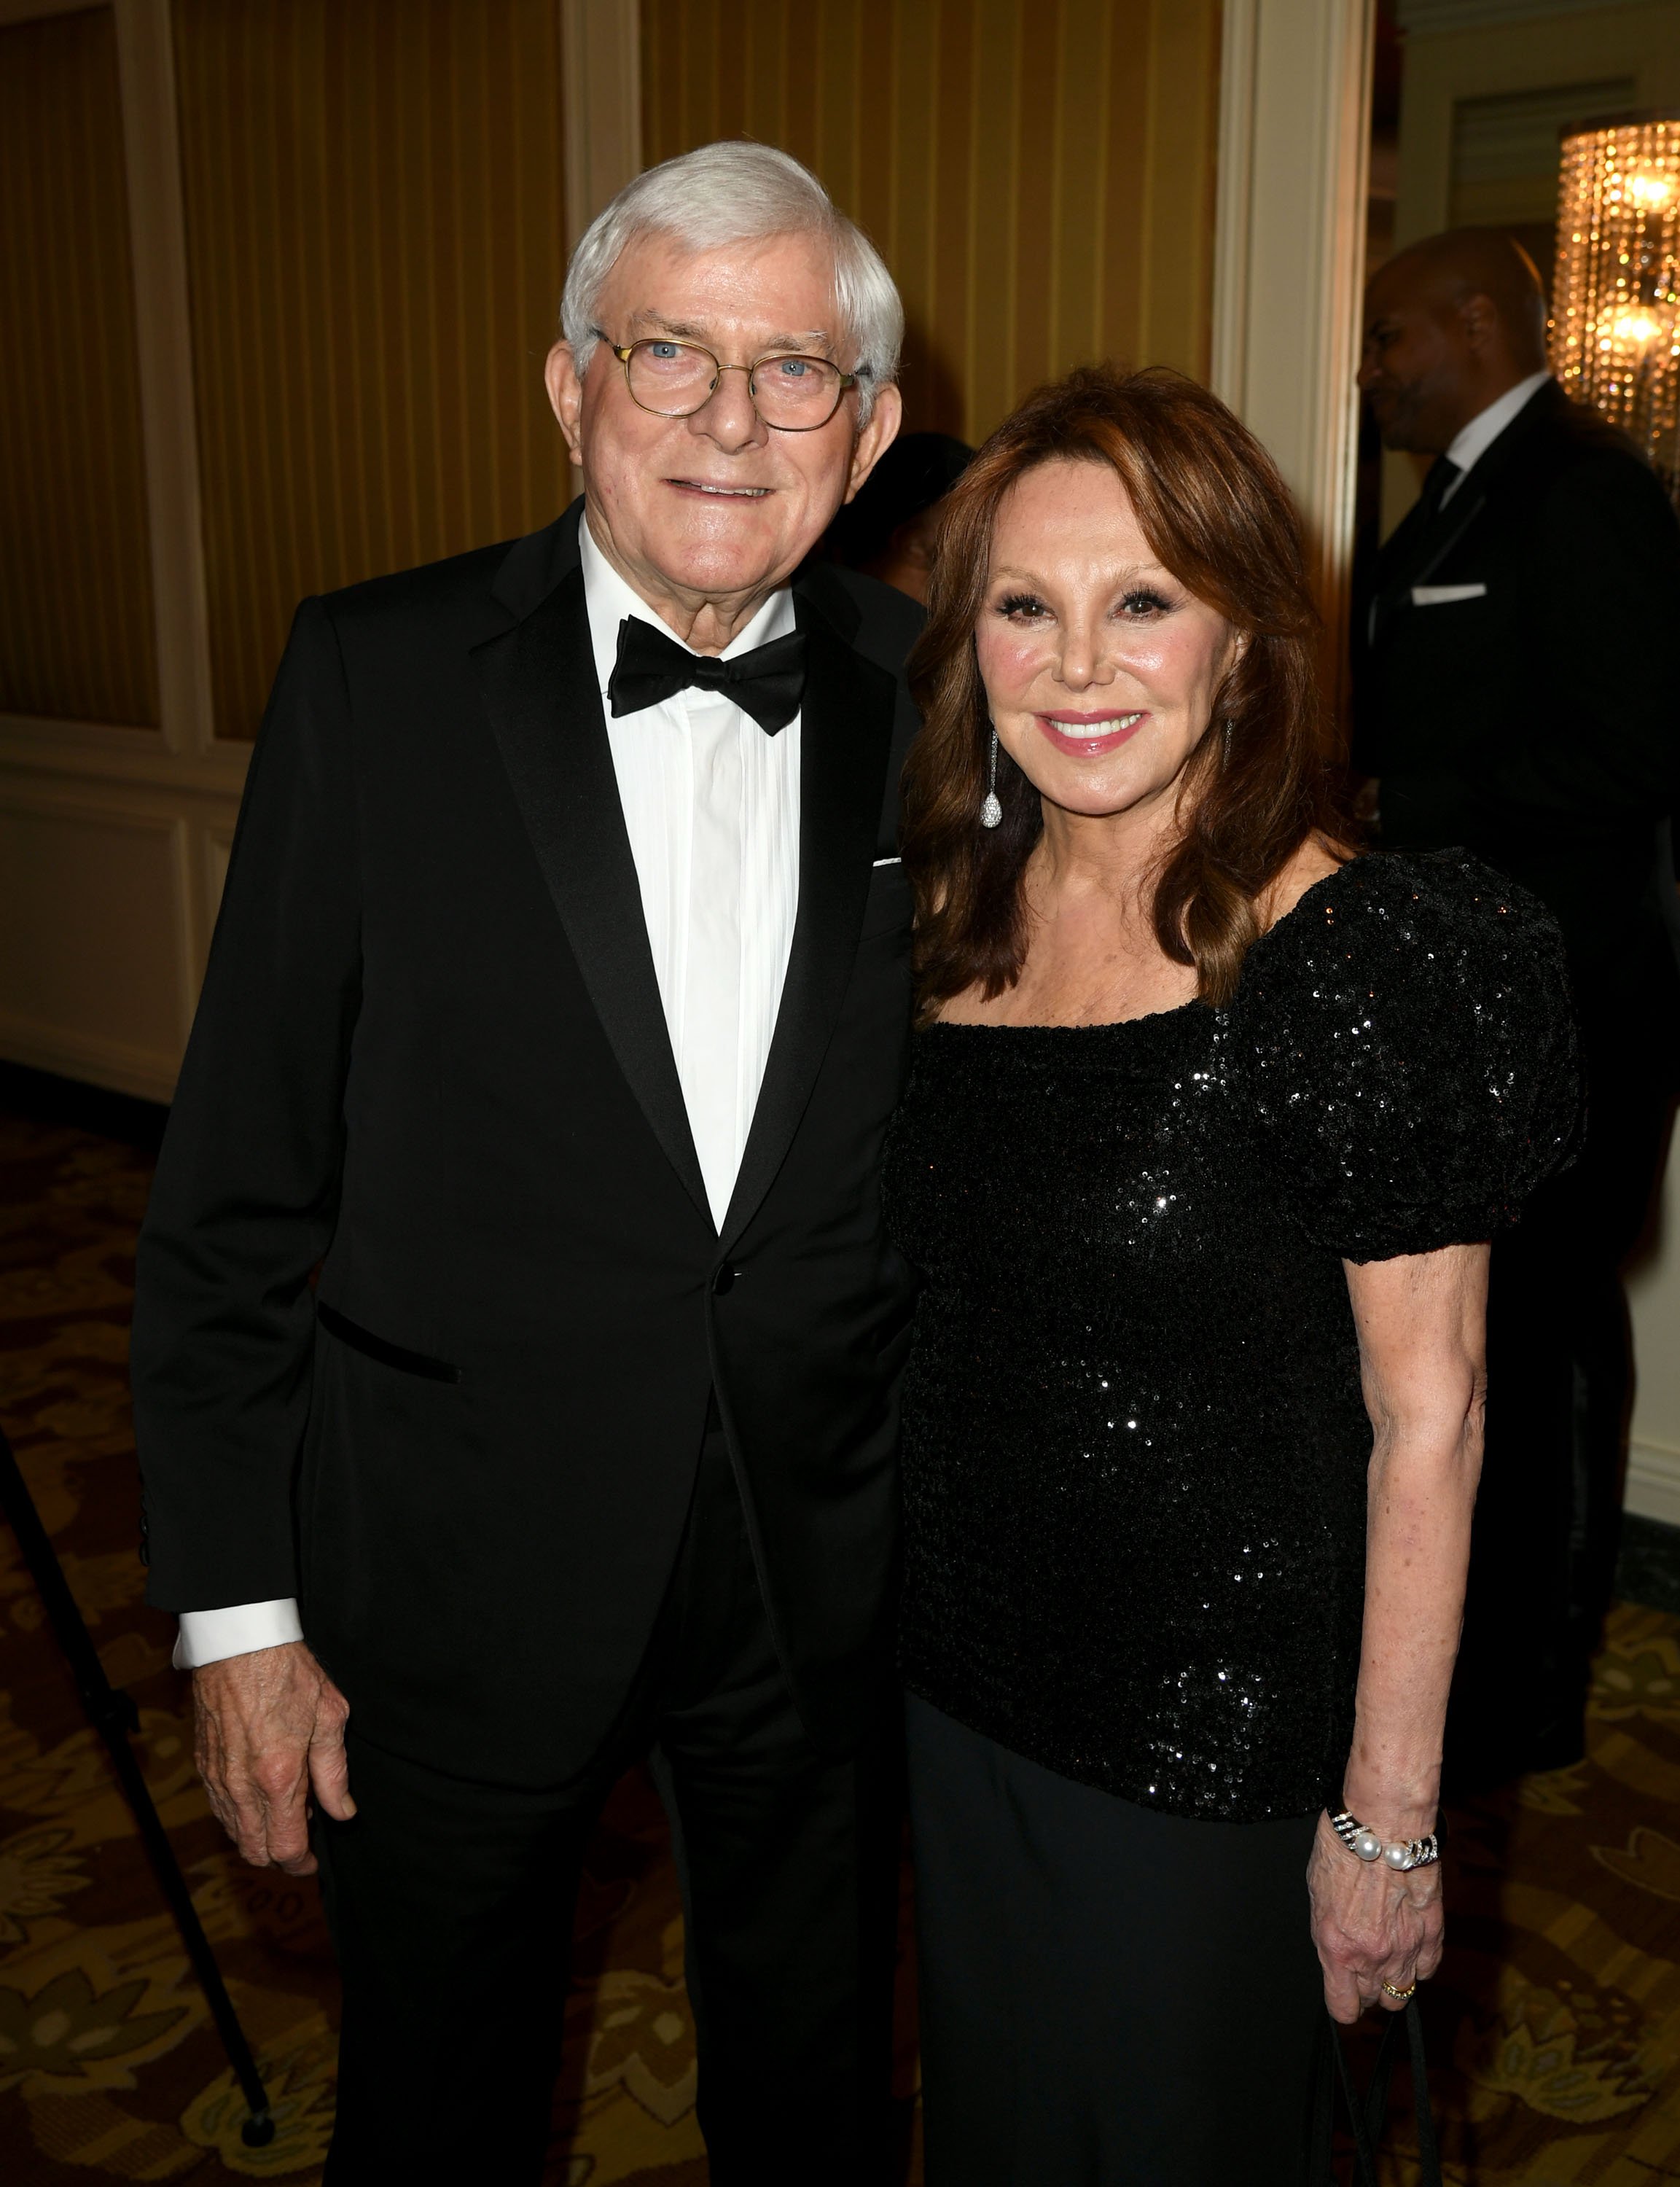 Phil Donahue and Marlo Thomas arrive at the American Icon Awards at the Beverly Wilshire Four Seasons Hotel on May 19, 2019 | Photo: GettyImages